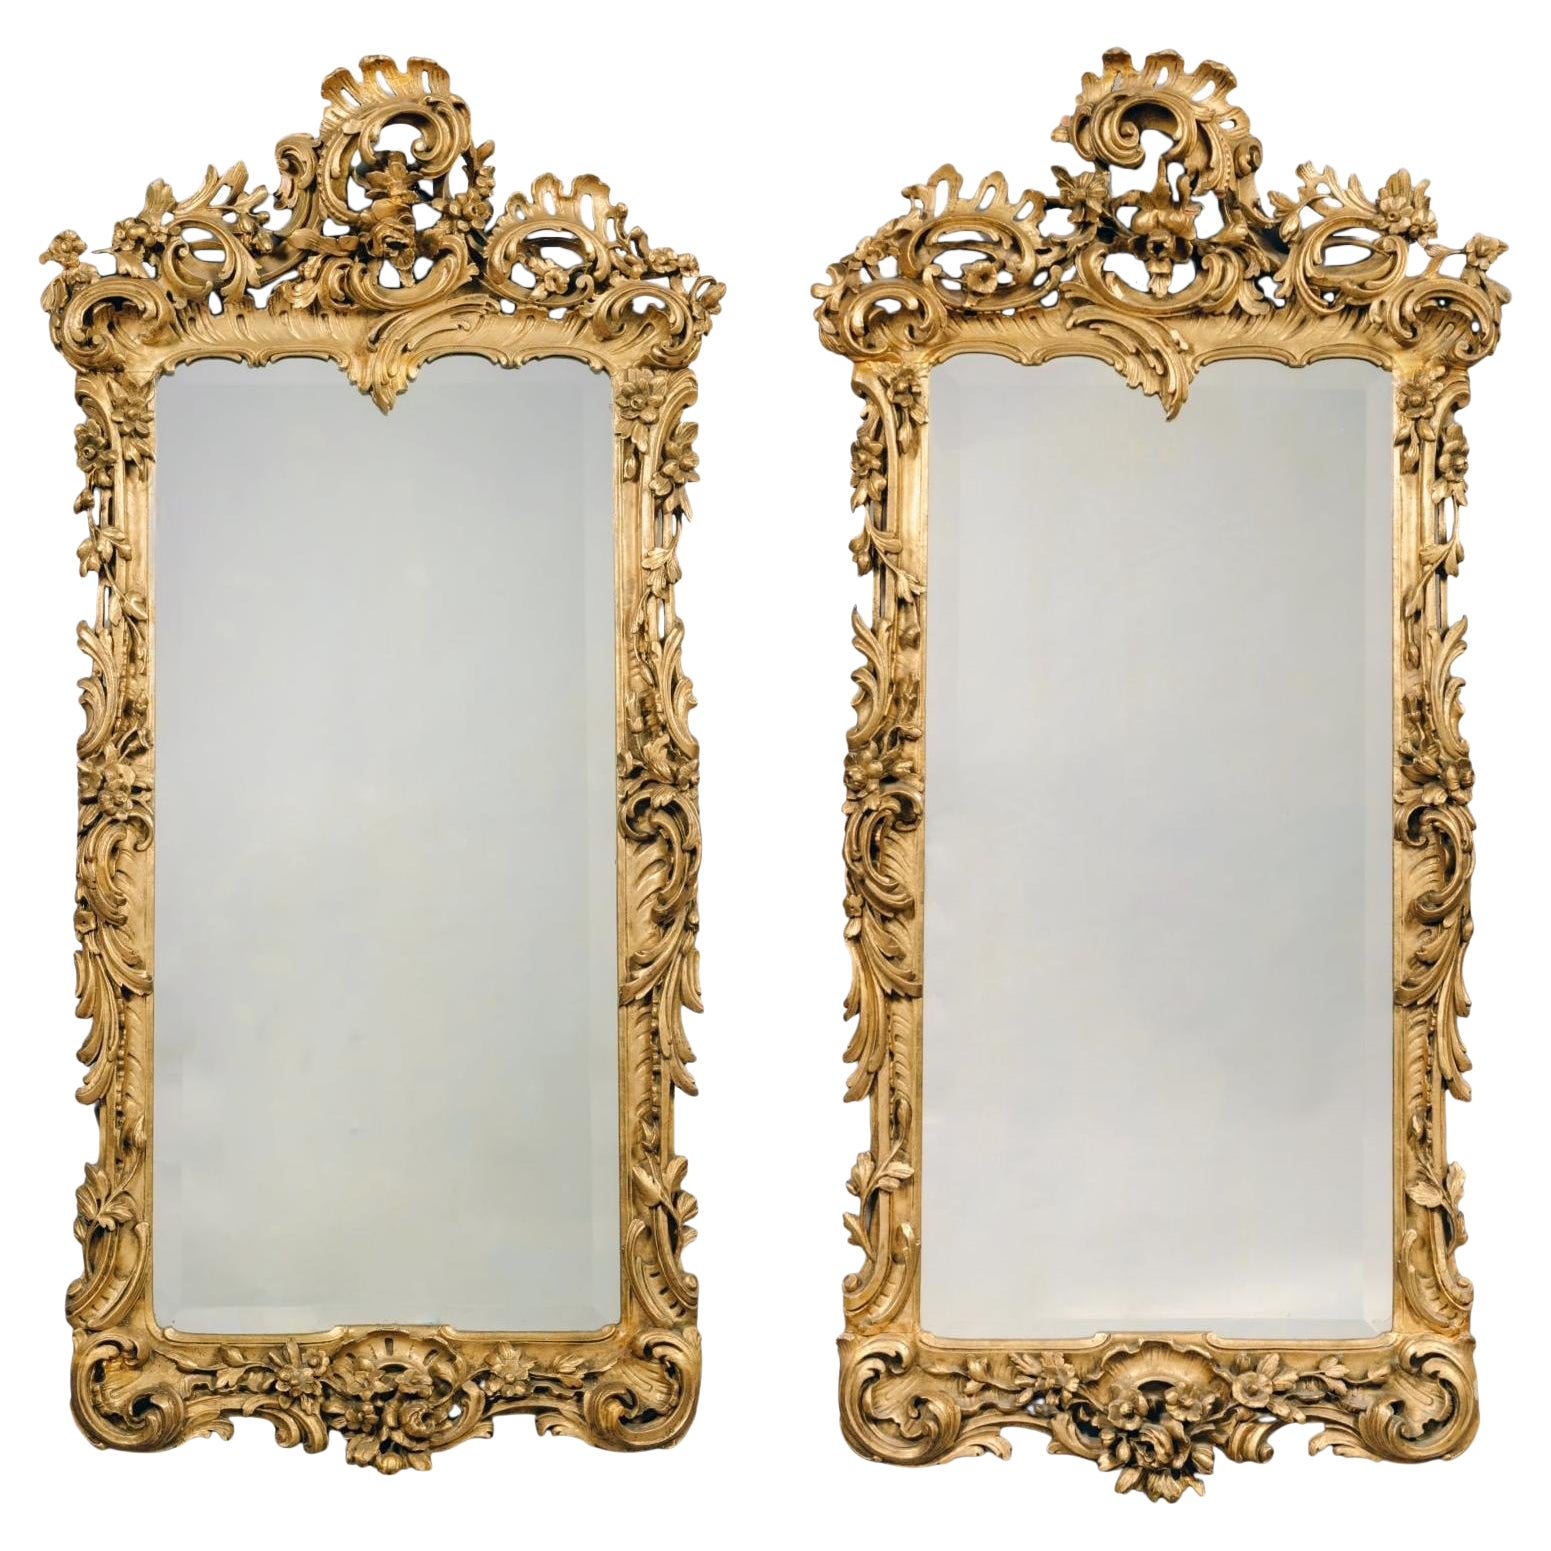 A Fine Pair of George III Style Carved Giltwood Mirrors For Sale